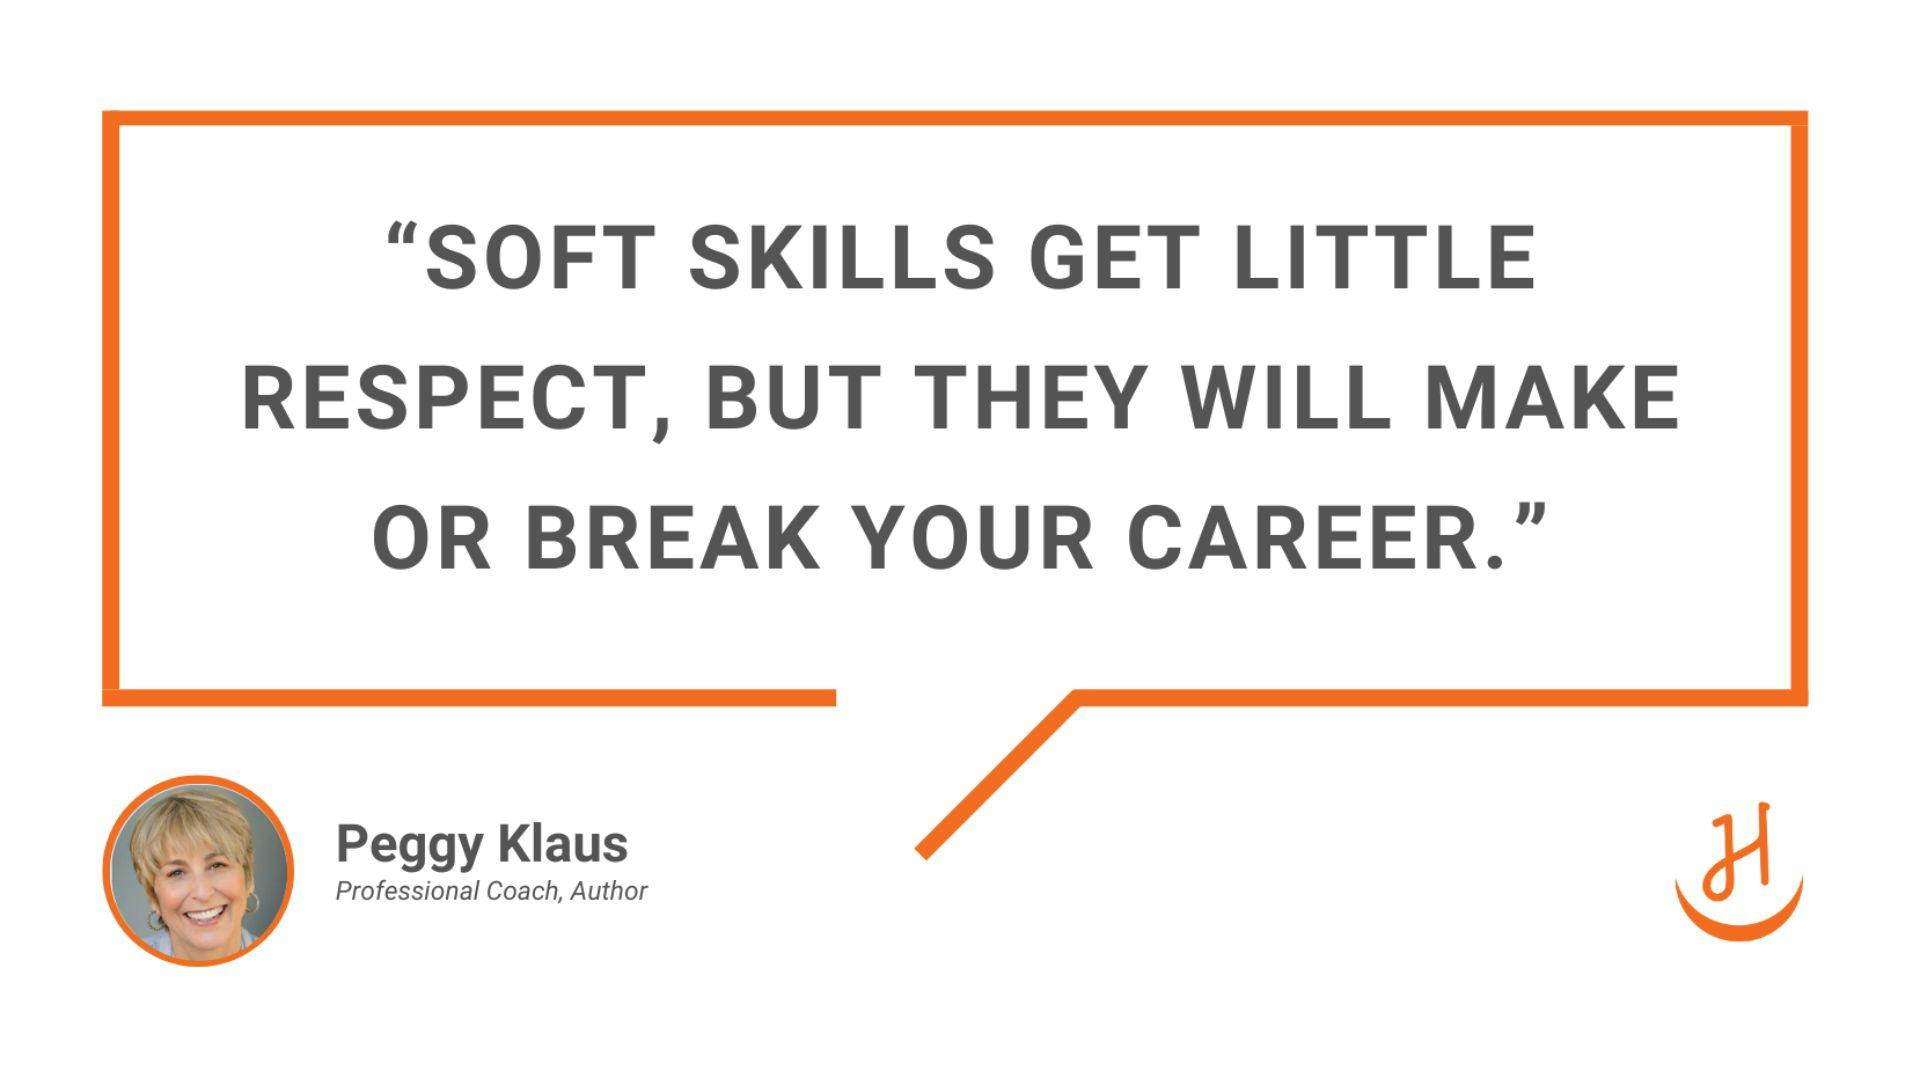 Peggy Klaus Quote "Soft skills get little respect, but they will make or break your career"